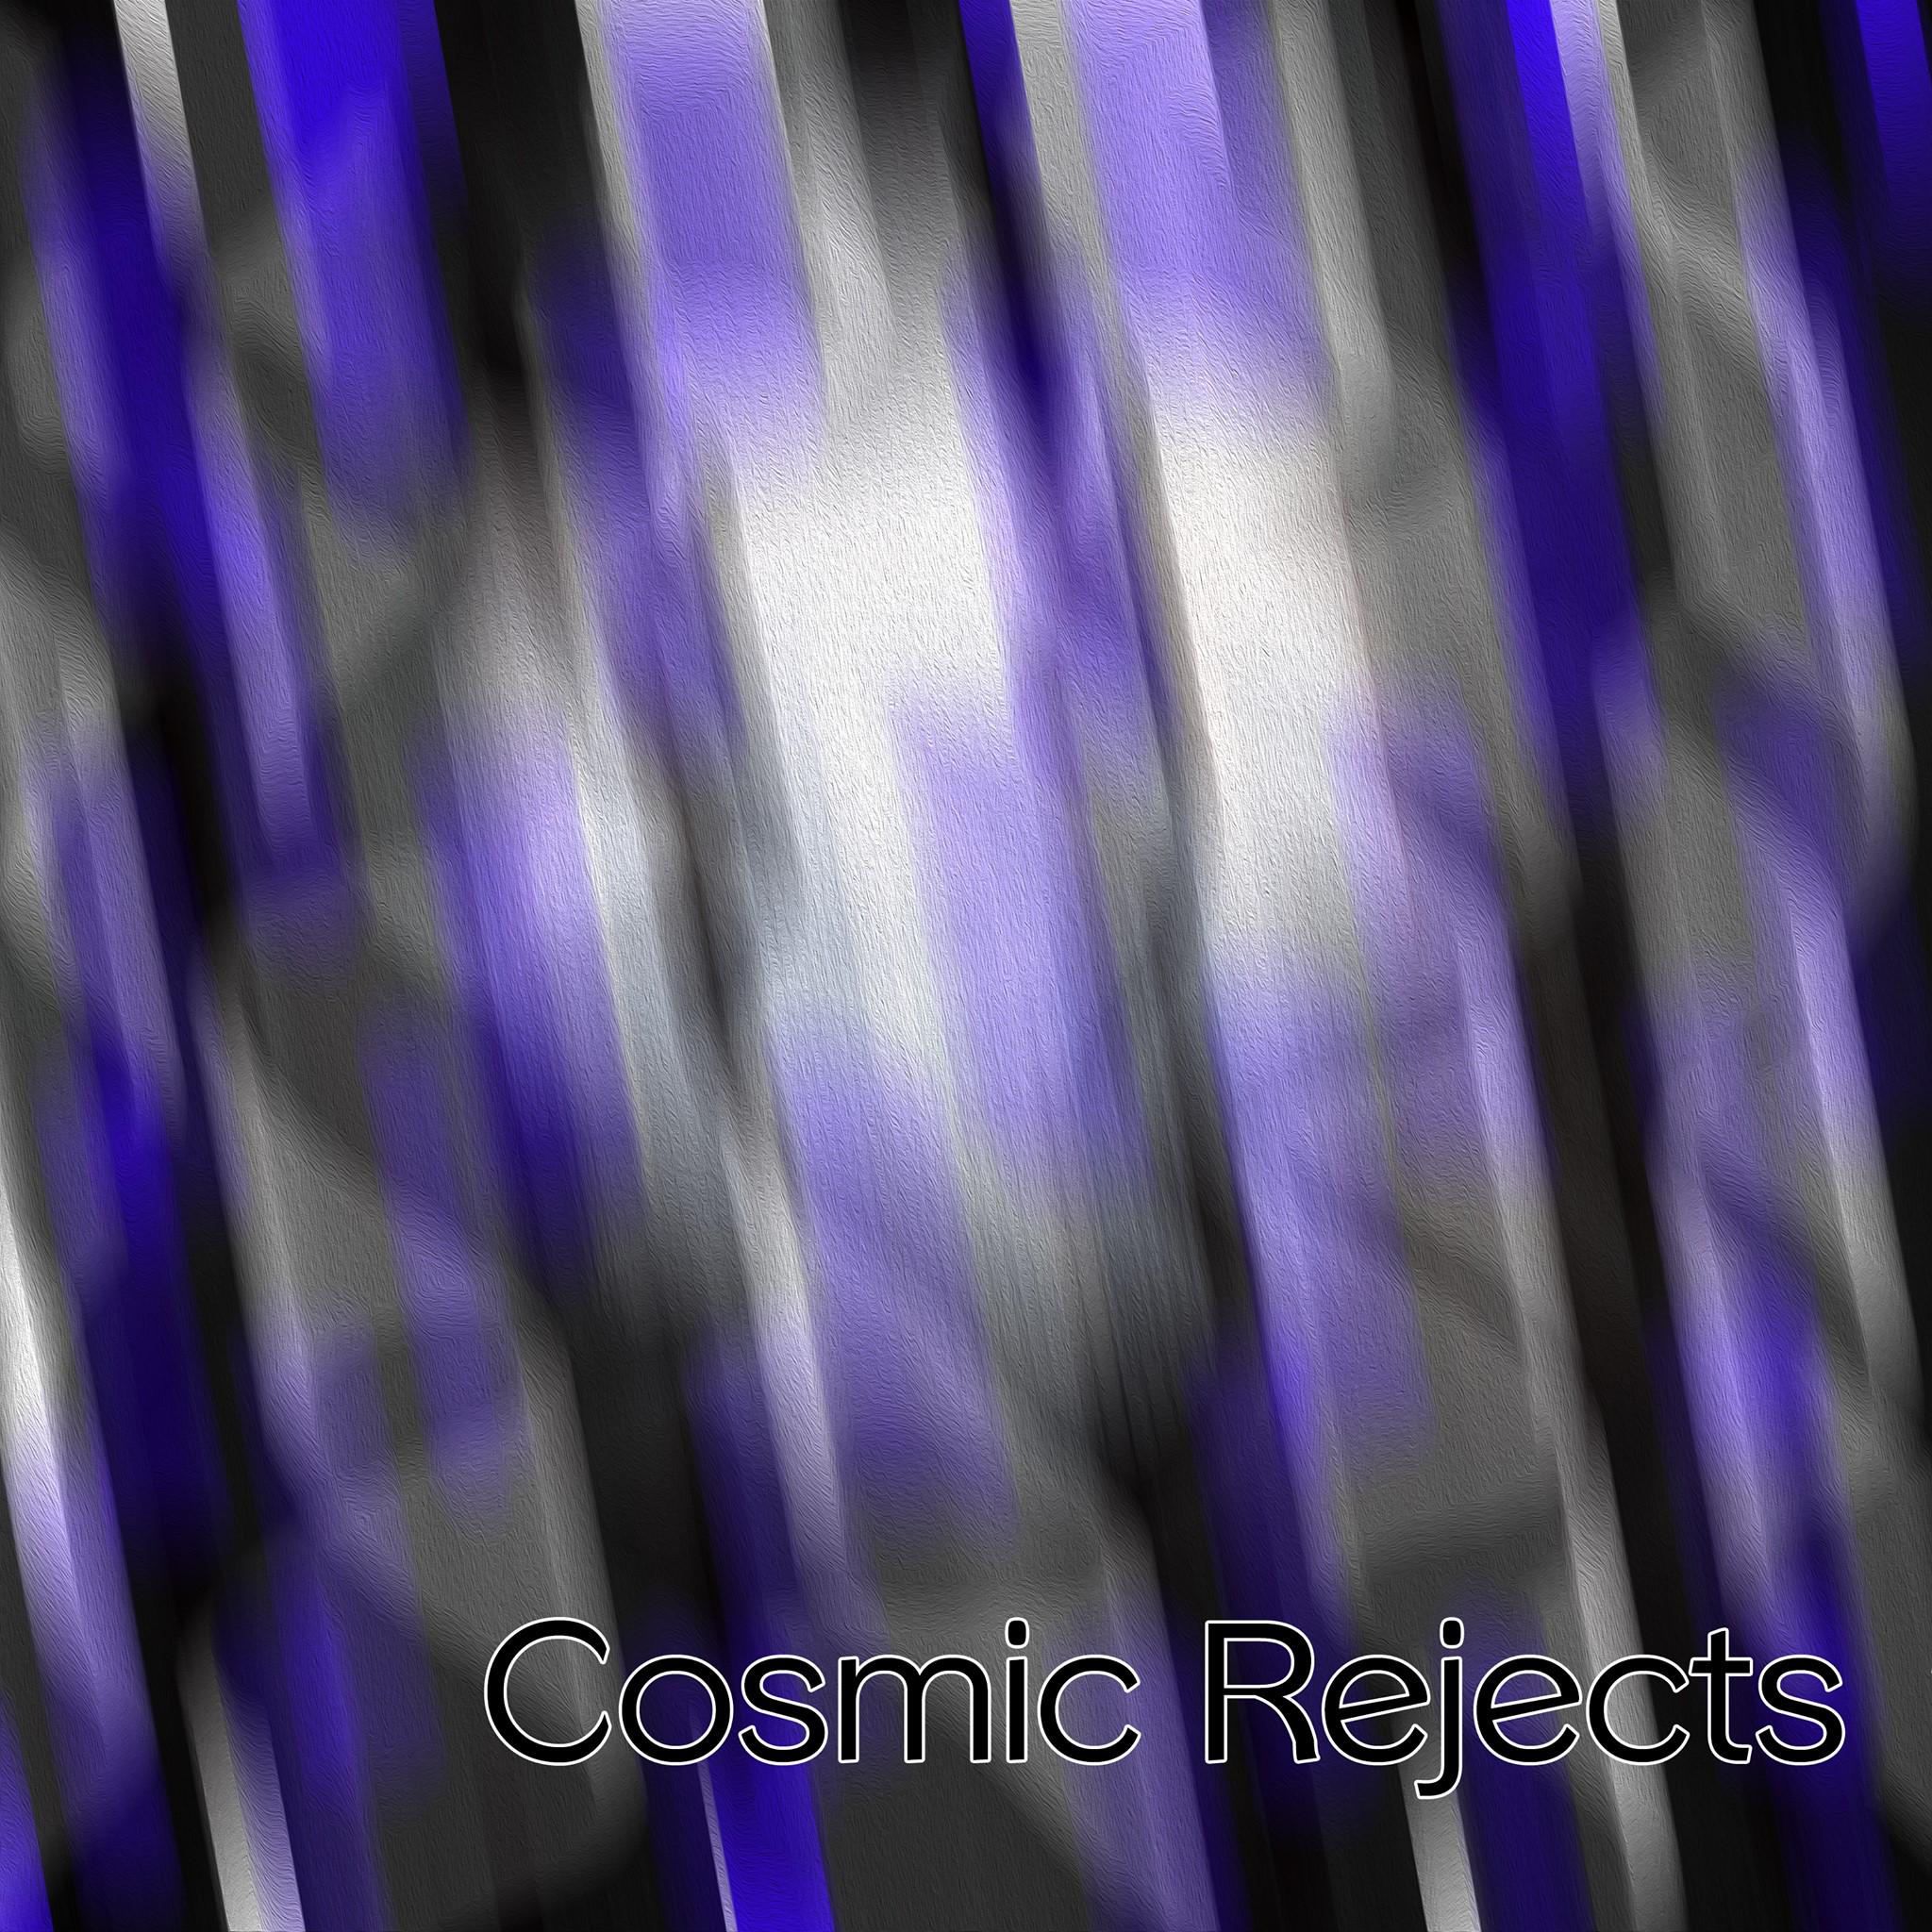 Cosmic Rejects